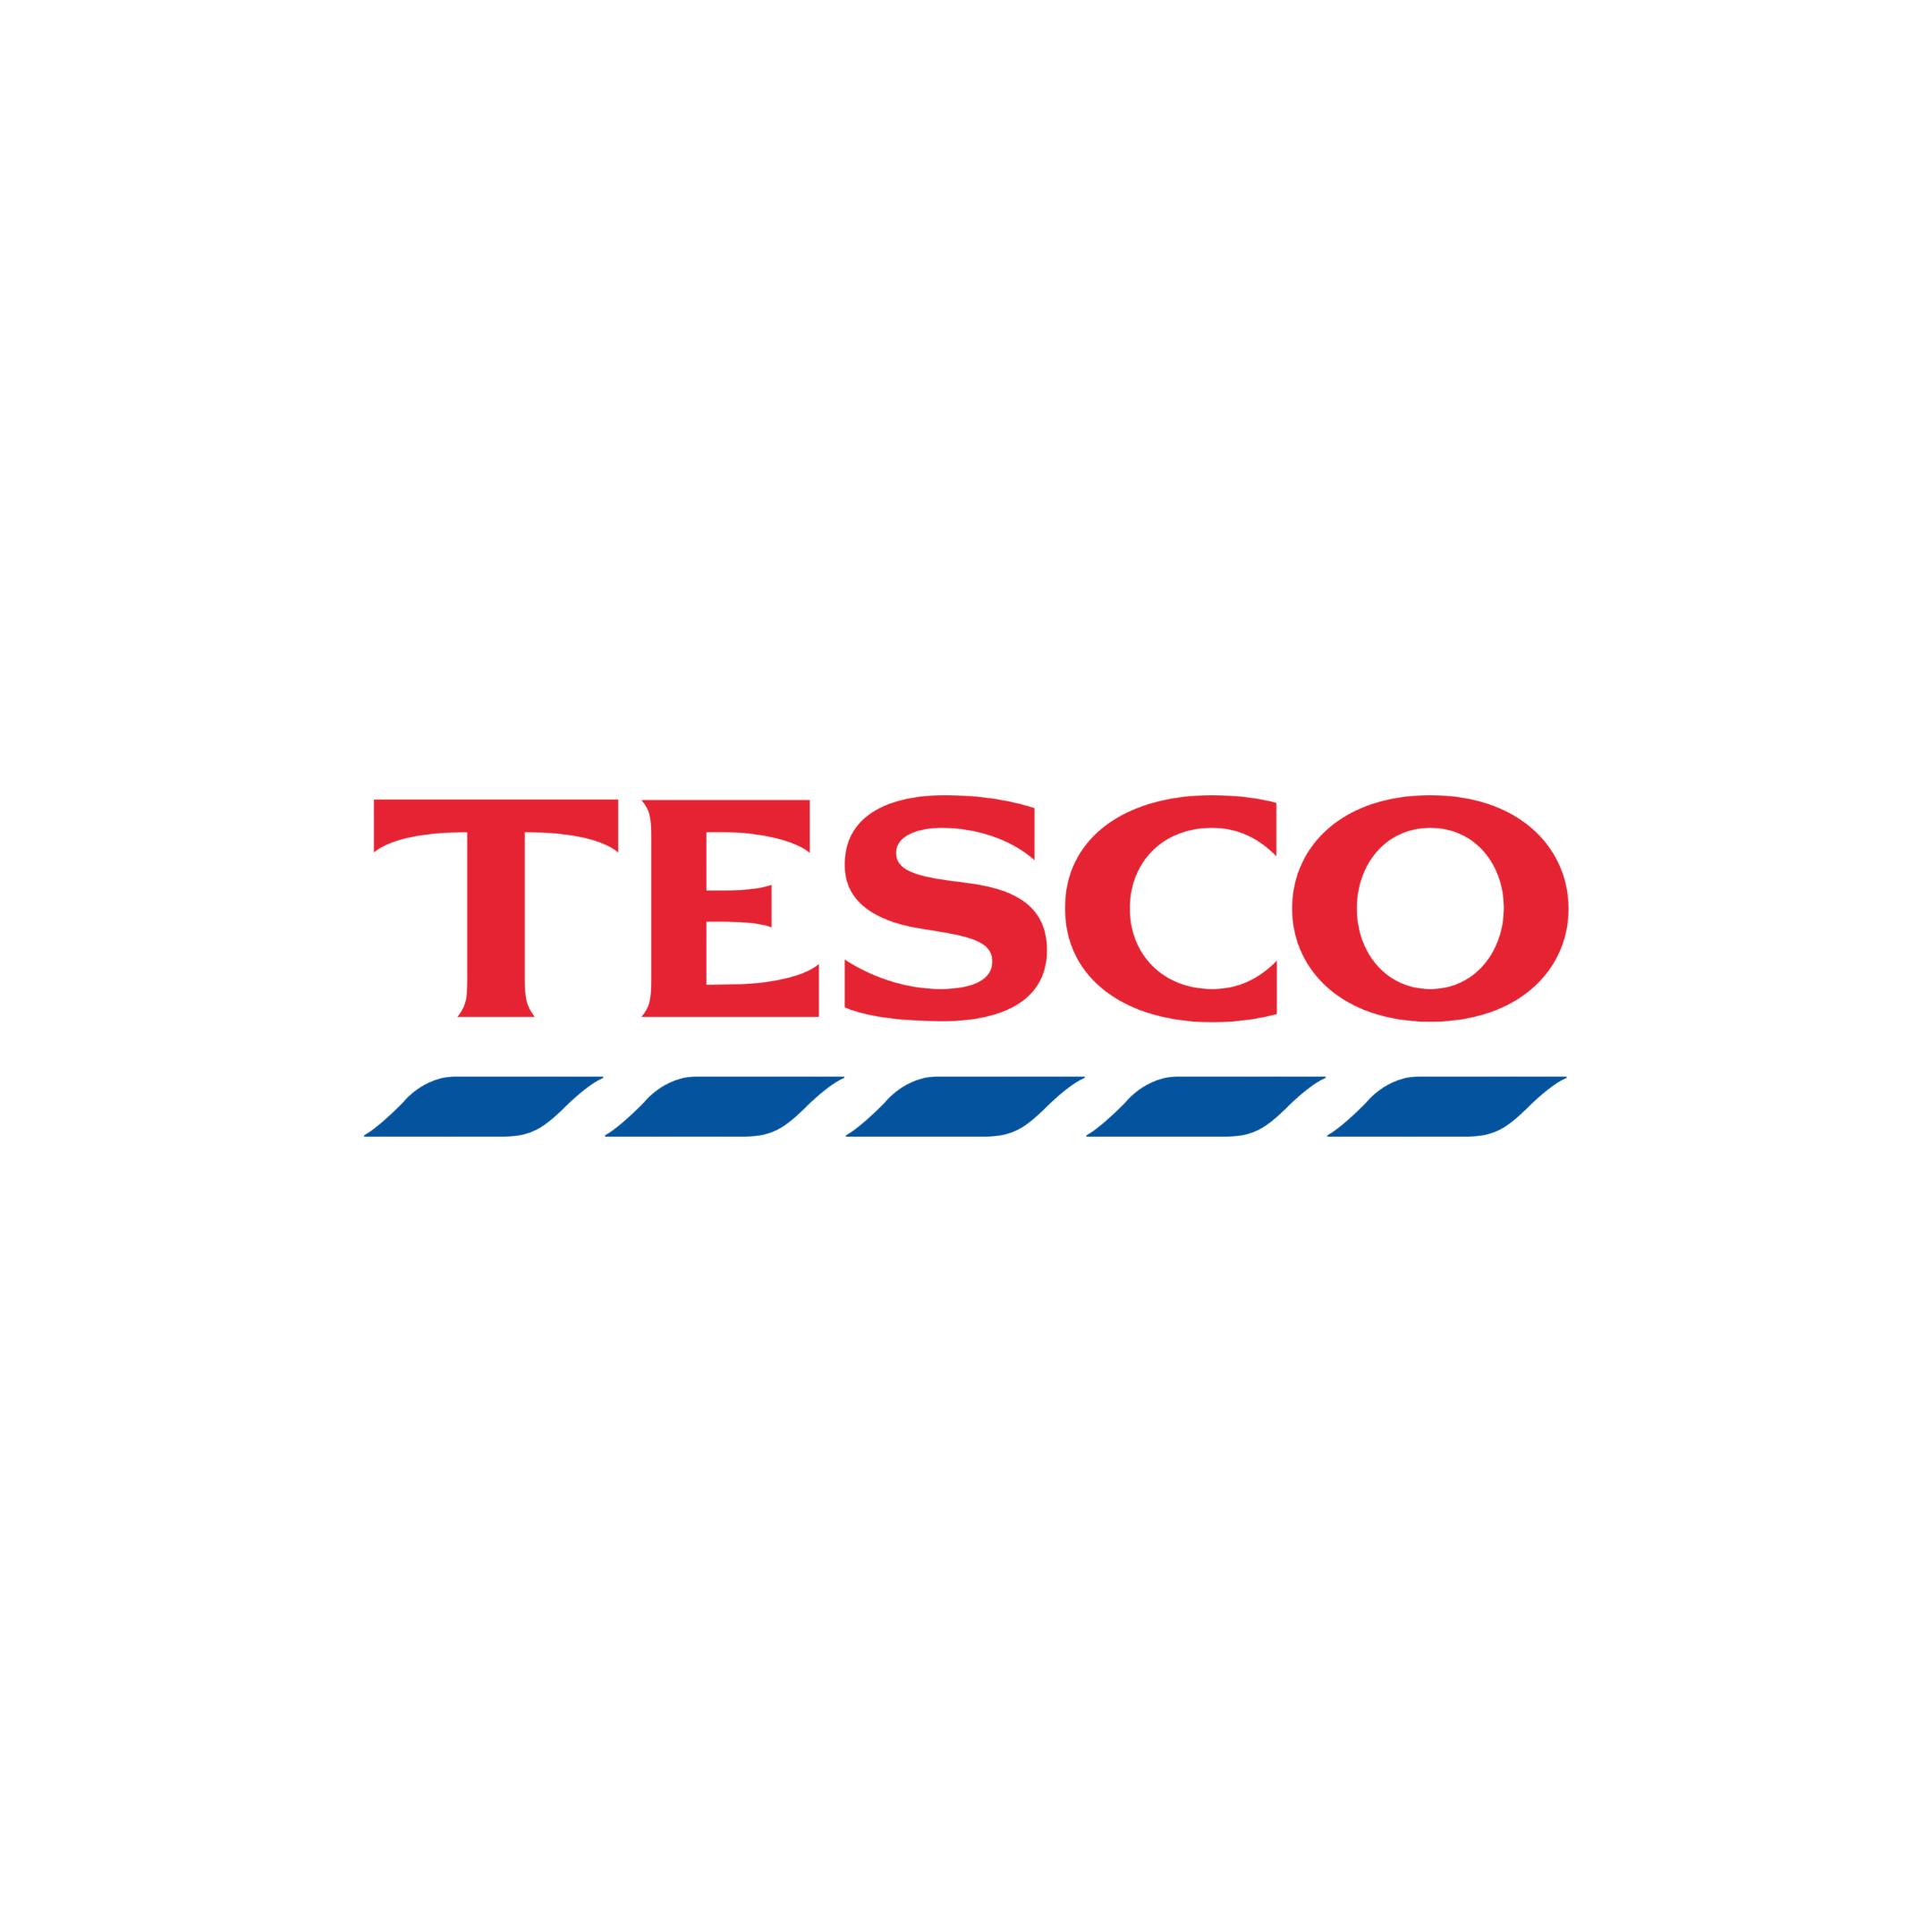 Tessier-employment-icons-Tesco.png